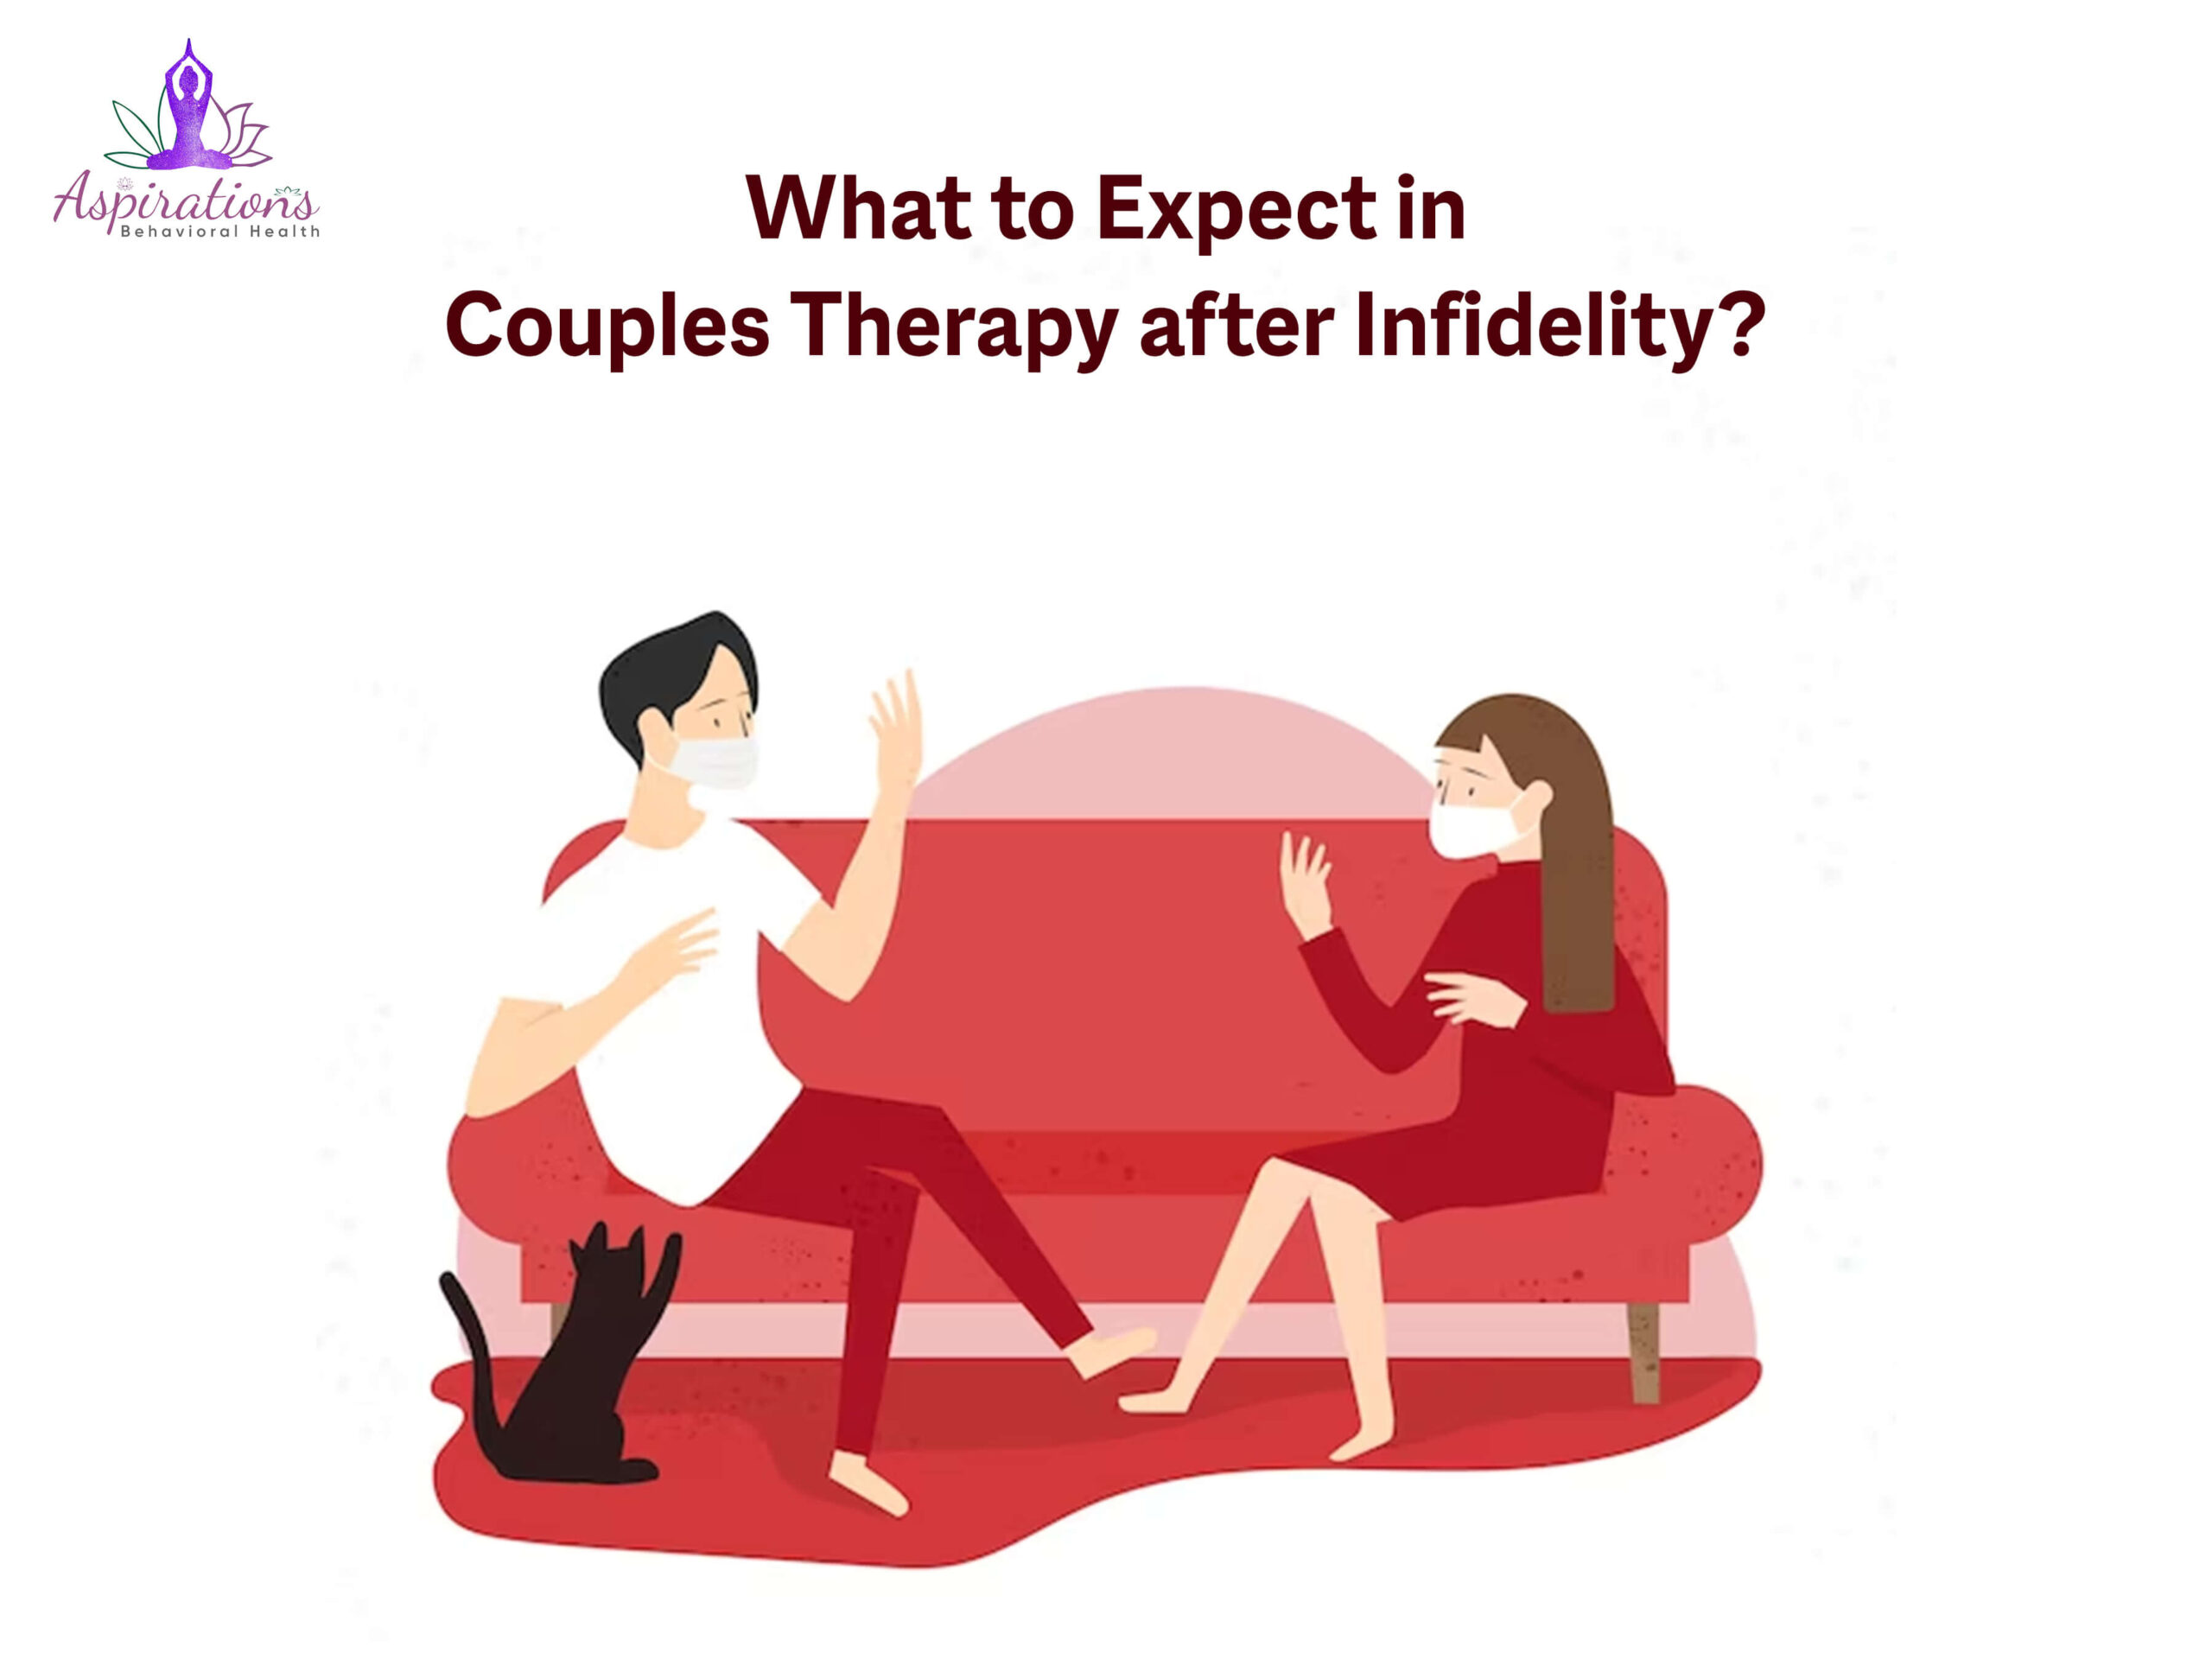 What to Expect in Couples Therapy after Infidelity?